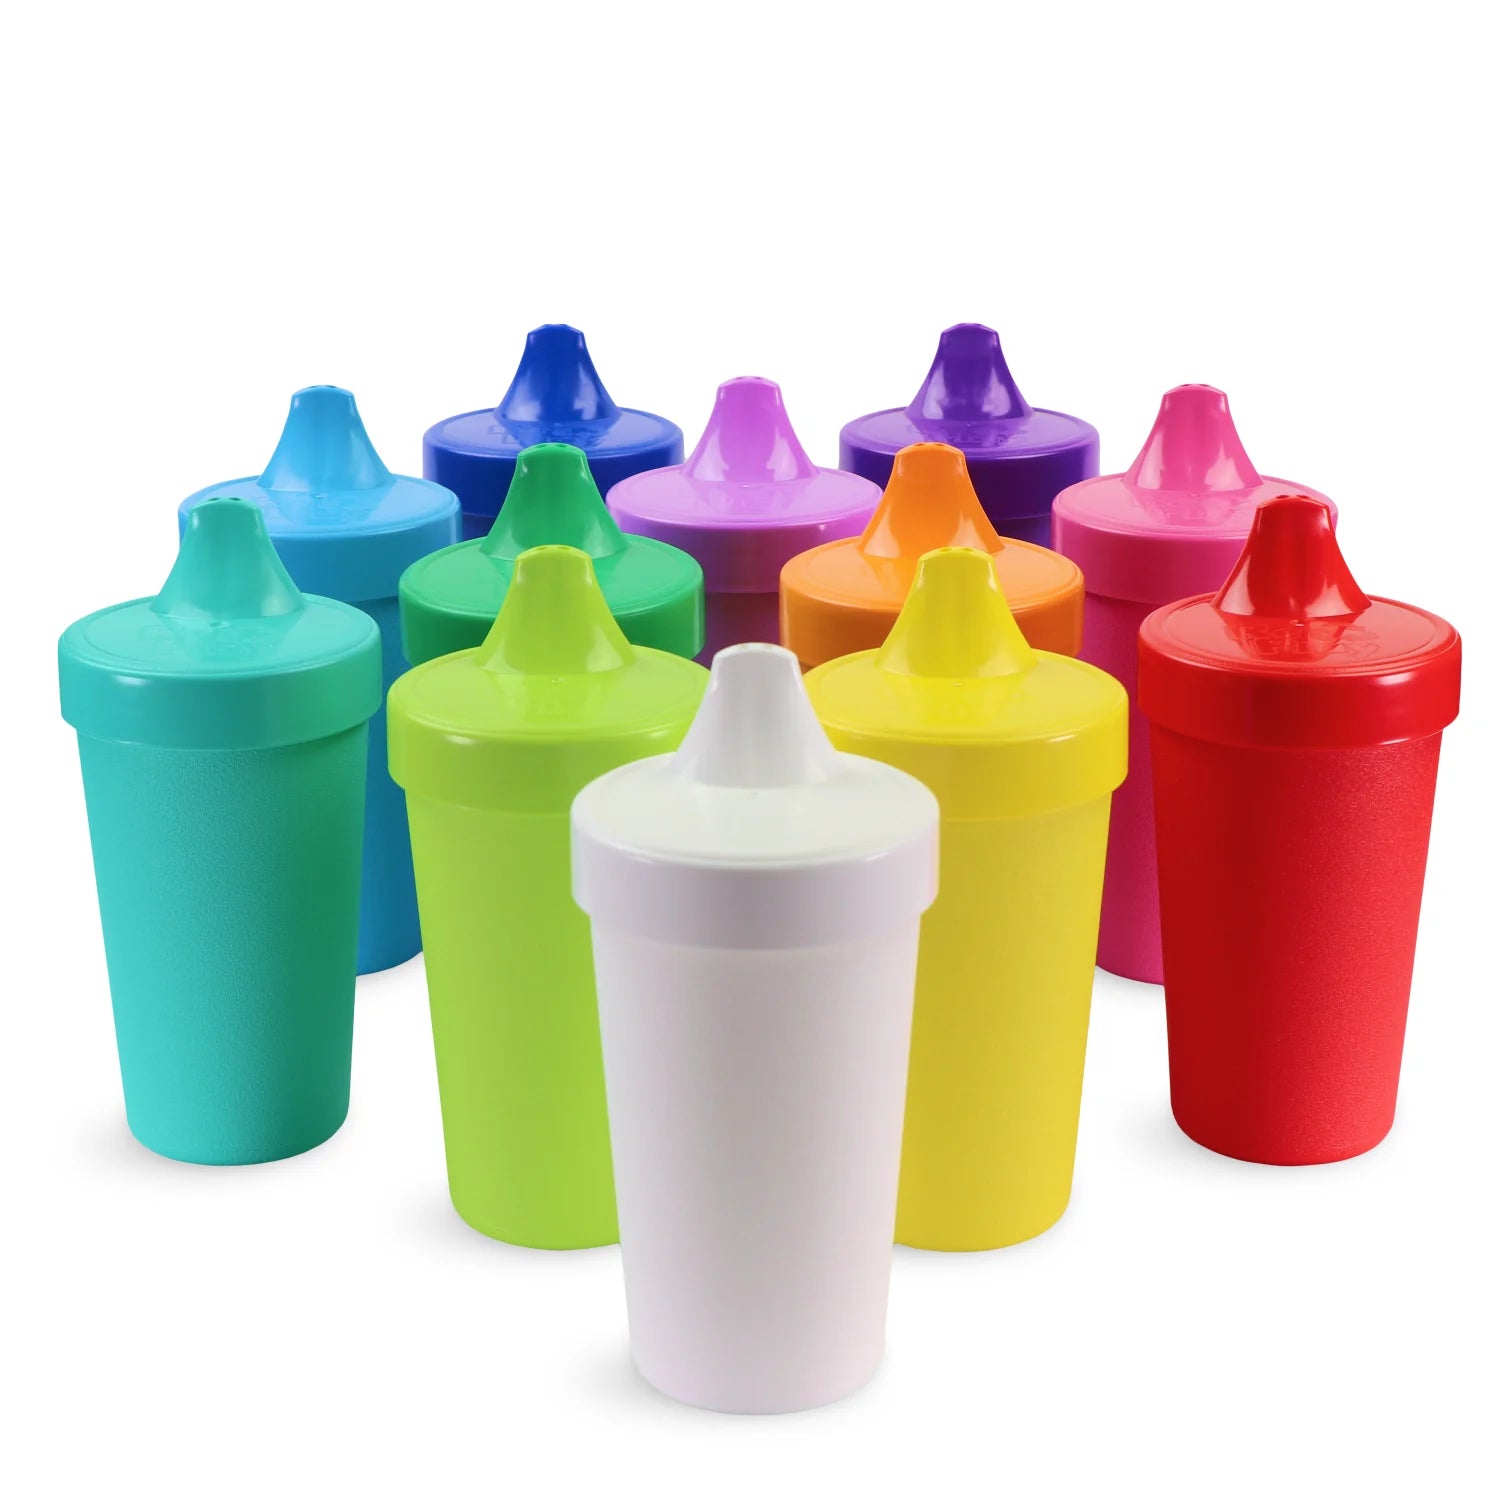 Re-Play Silicone Sippy Cups for Toddlers, 8 oz Kids Cups No Spill Cup Grey